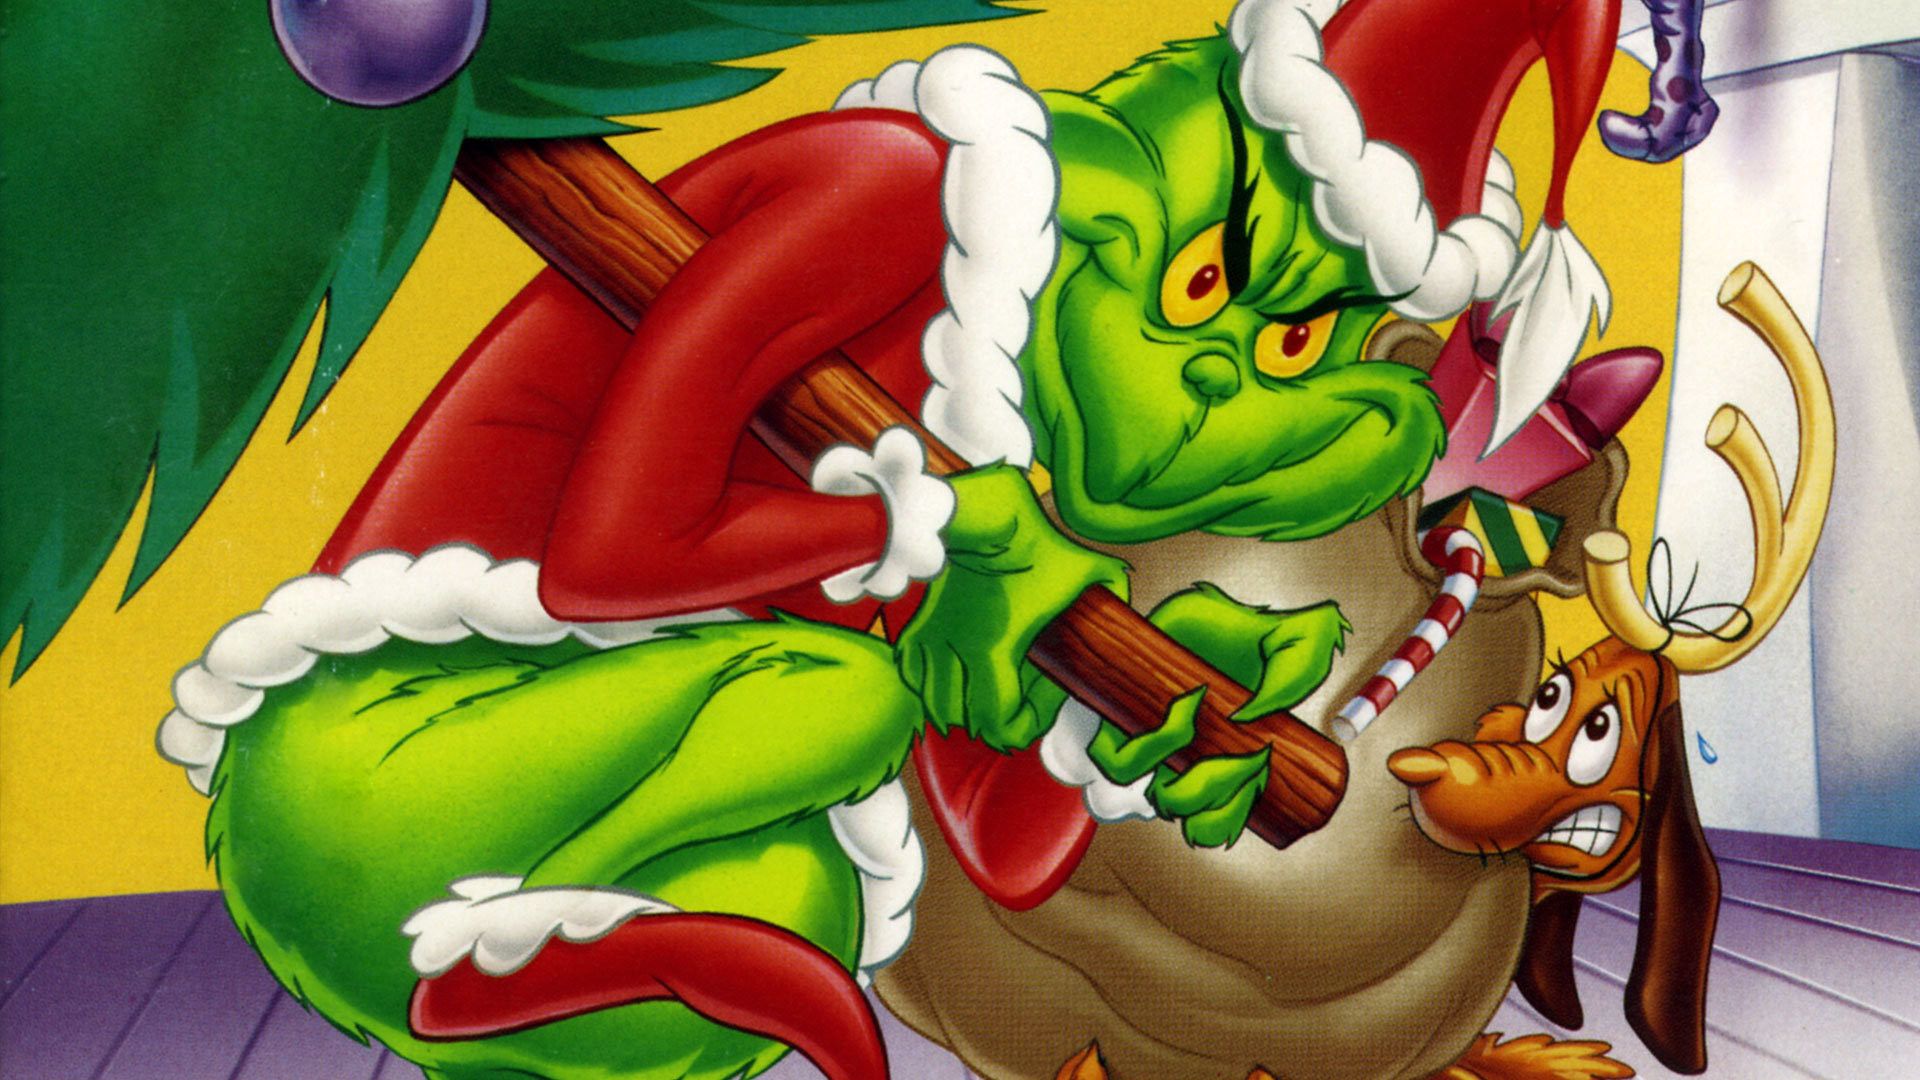 Hd wallpaper the grinch - Background Wallpapers for your Desktop